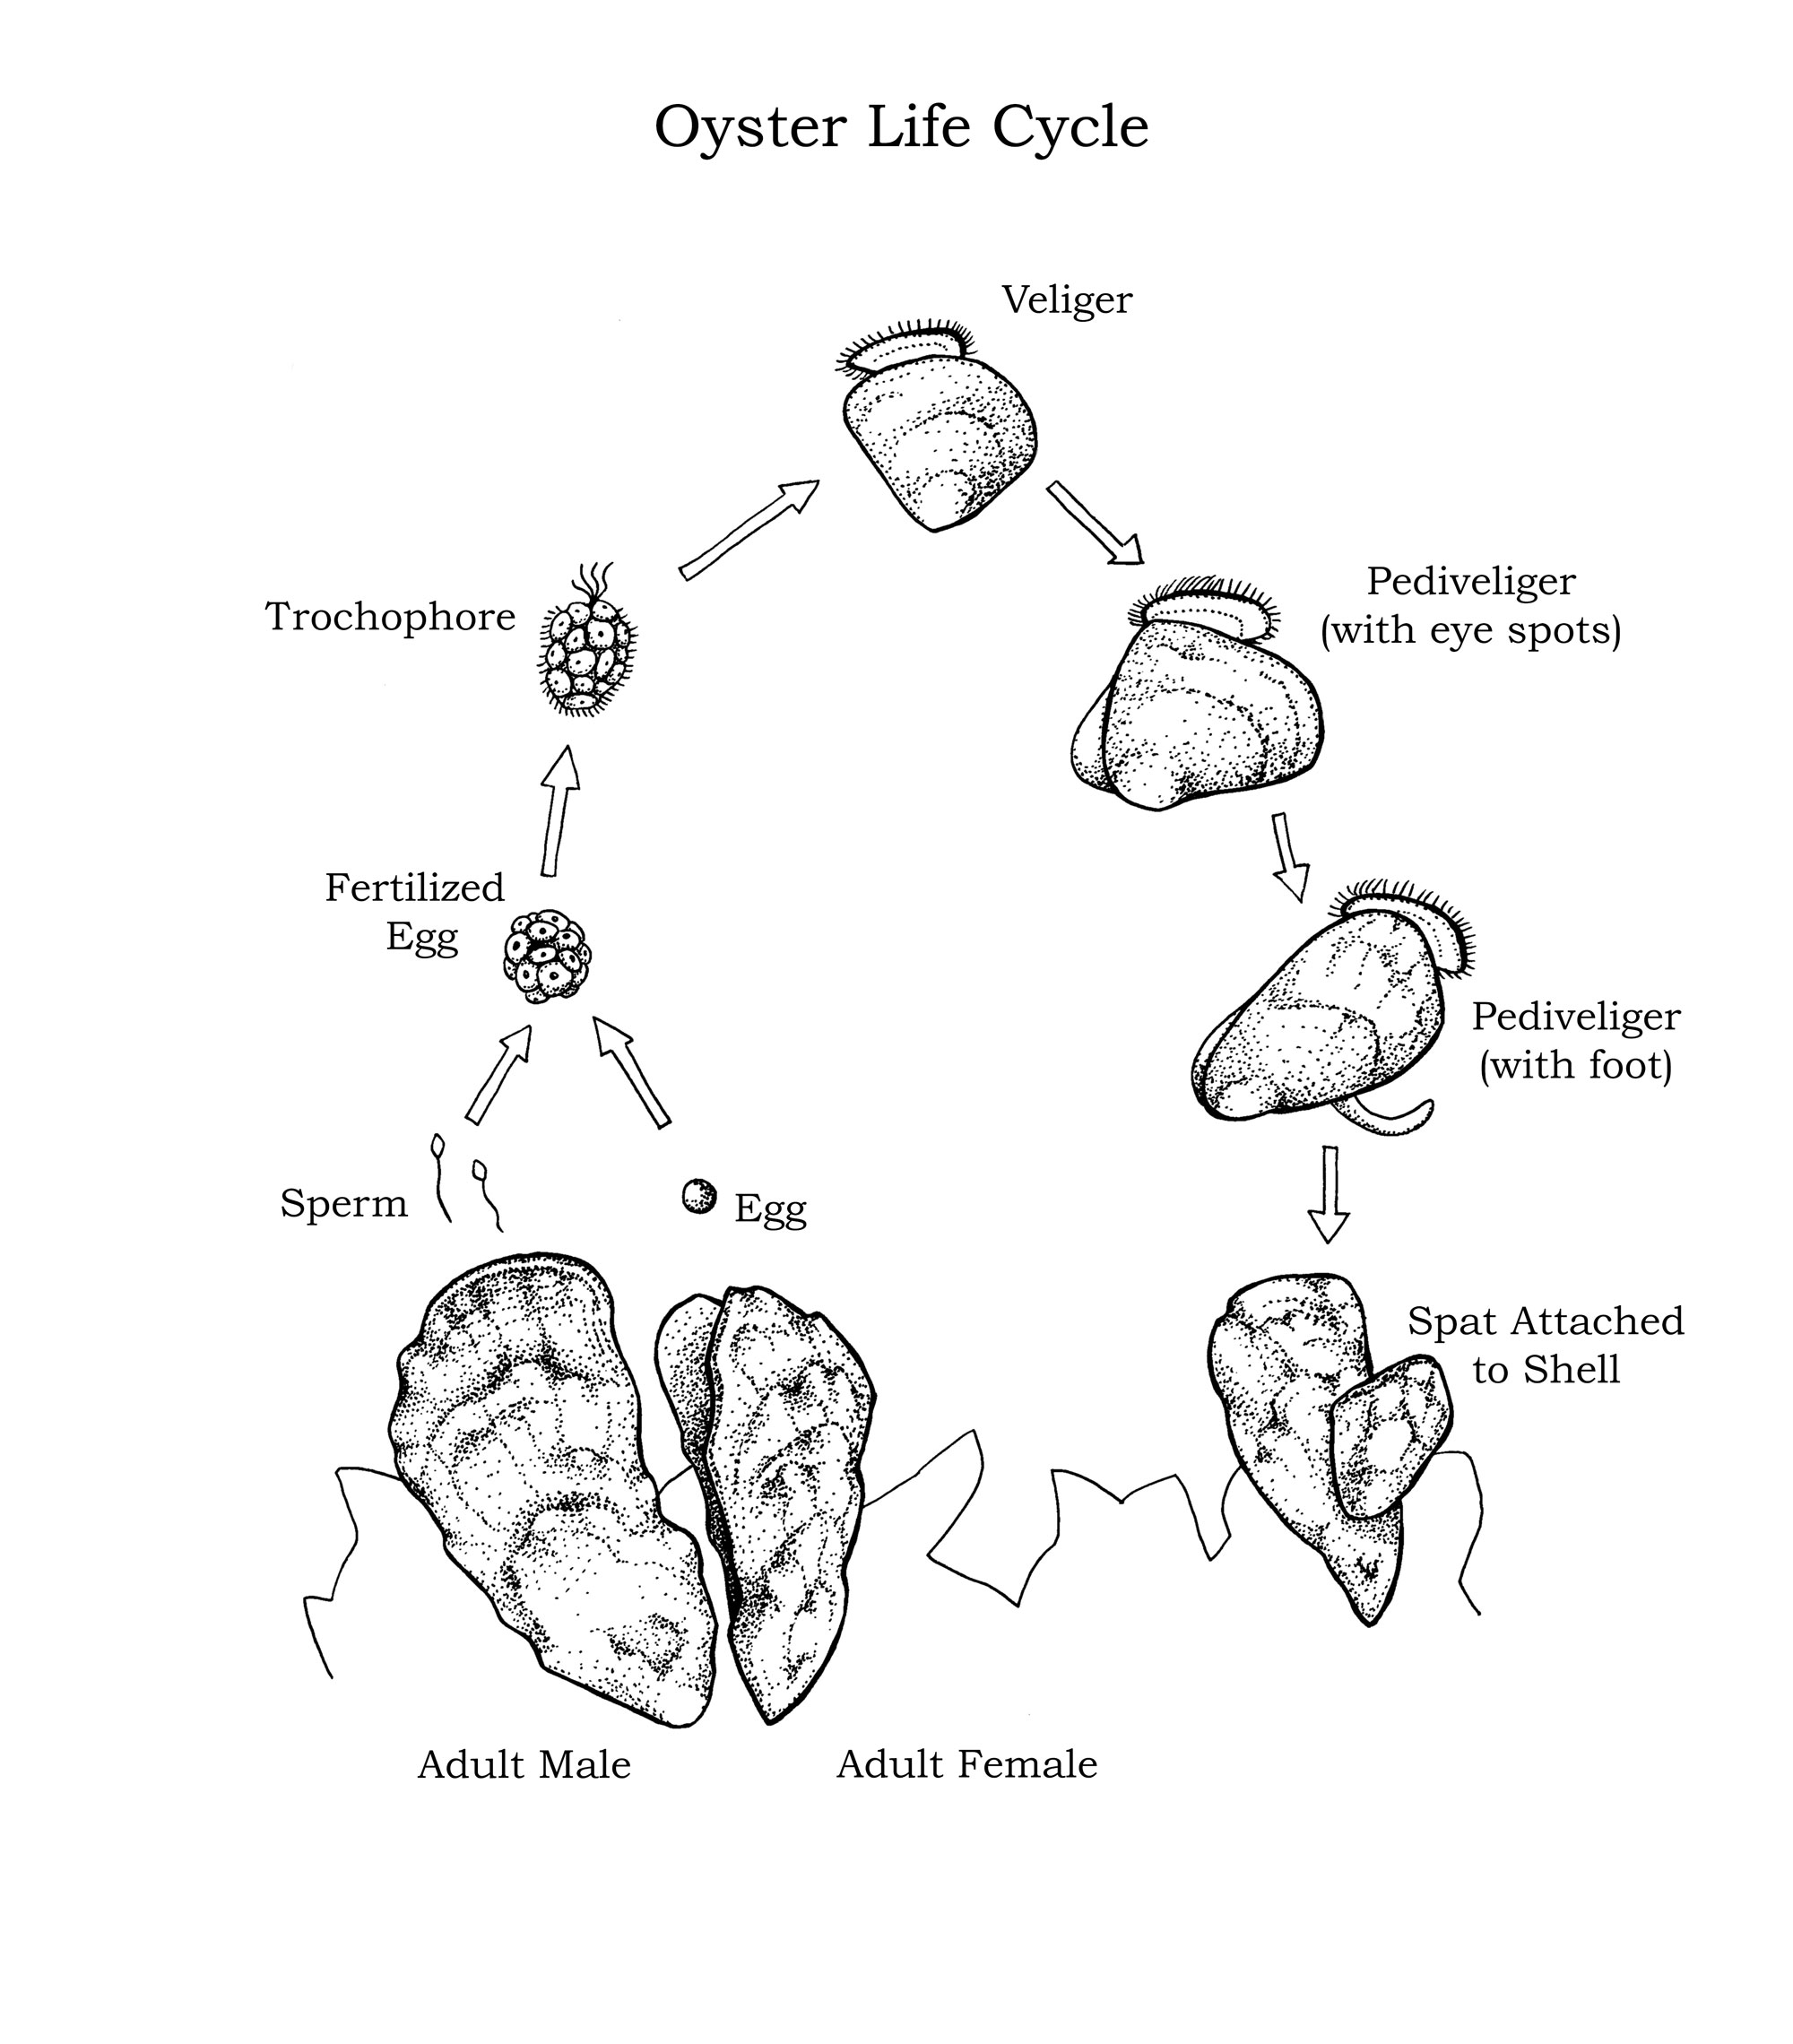 Illustration of oyster life cycle by Mary Koger